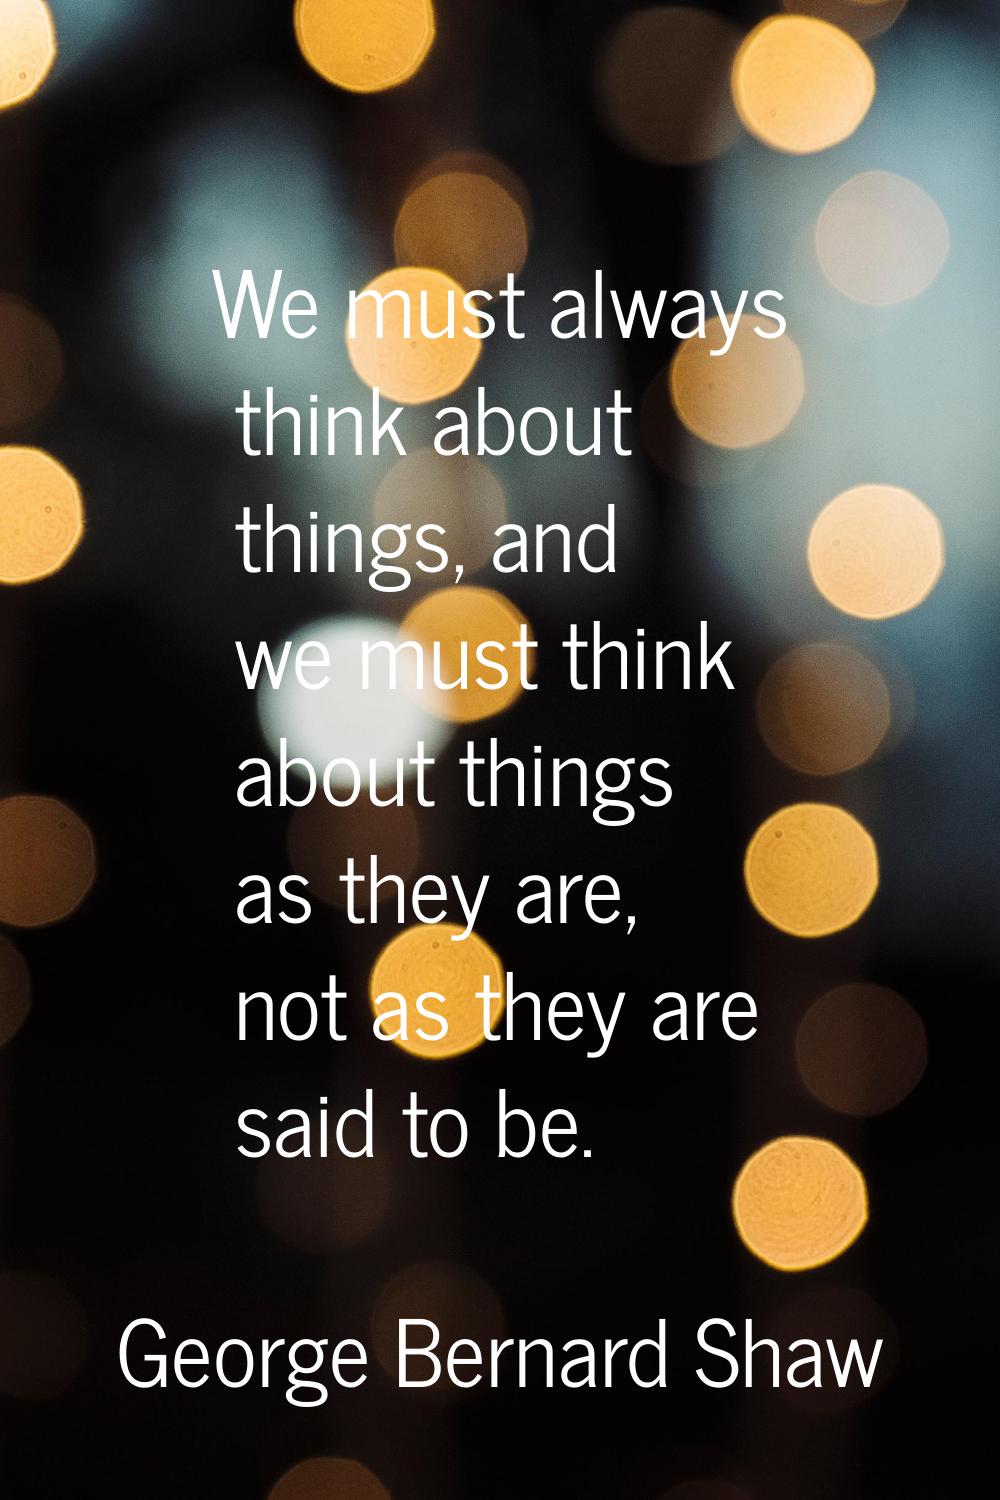 We must always think about things, and we must think about things as they are, not as they are said